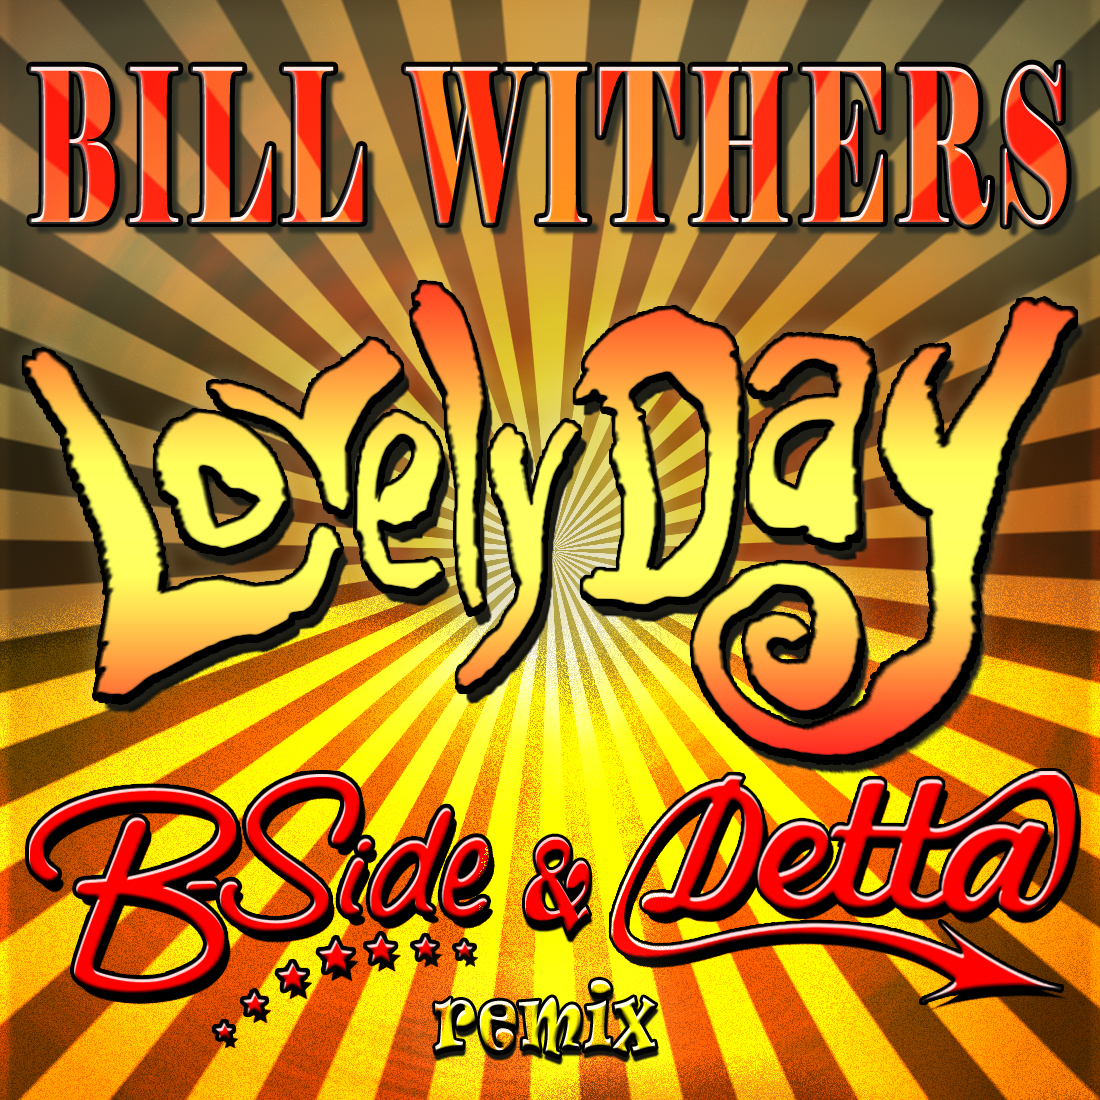 Art for Lovely Day (B-Side & Detta remix) by Bill Withers